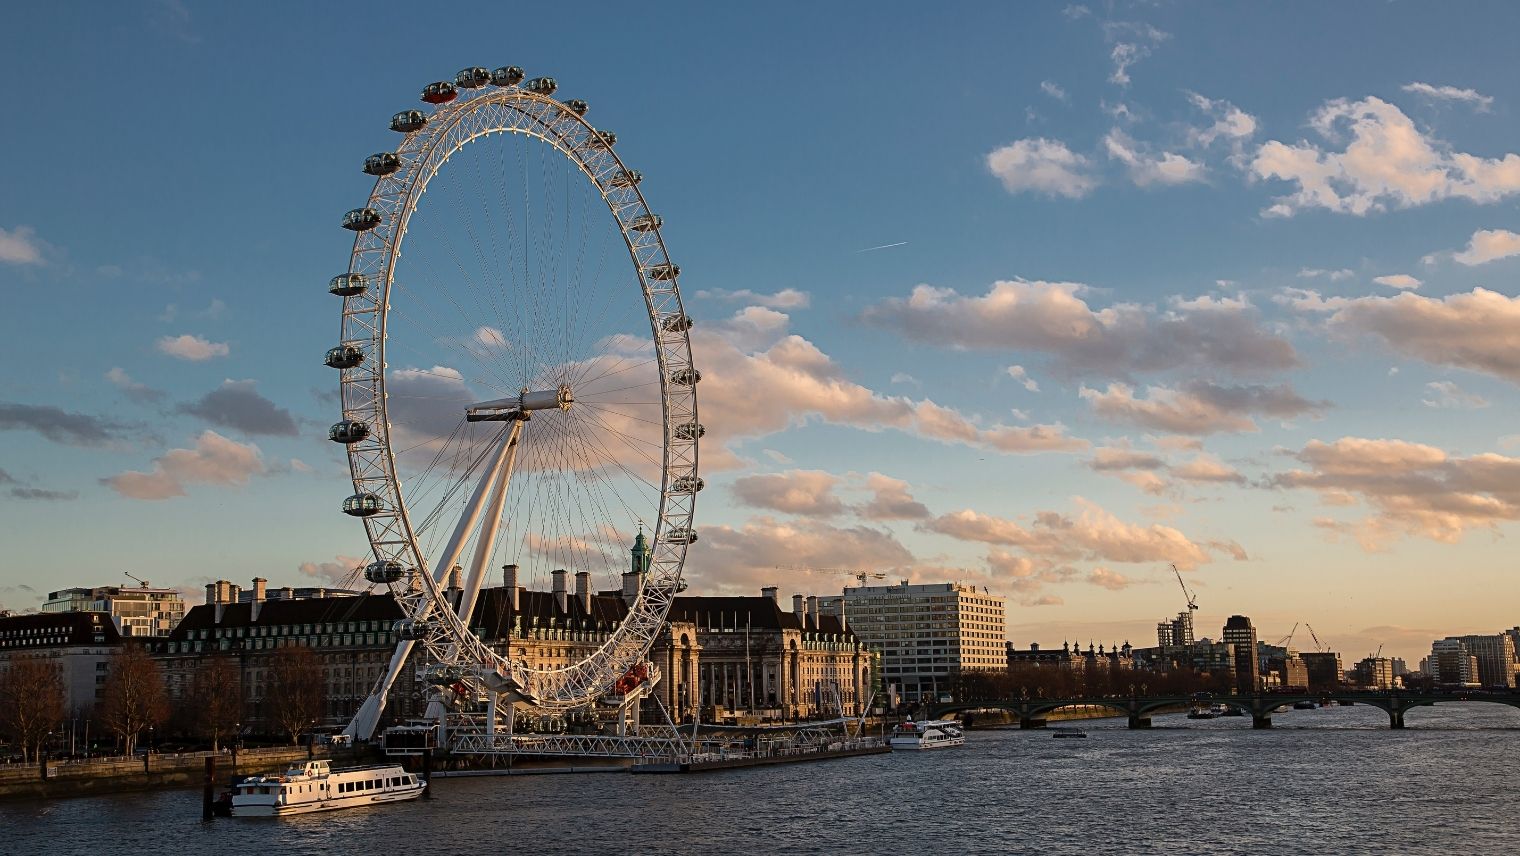 London Eye at sunset, taken from the north bank of the River Thames